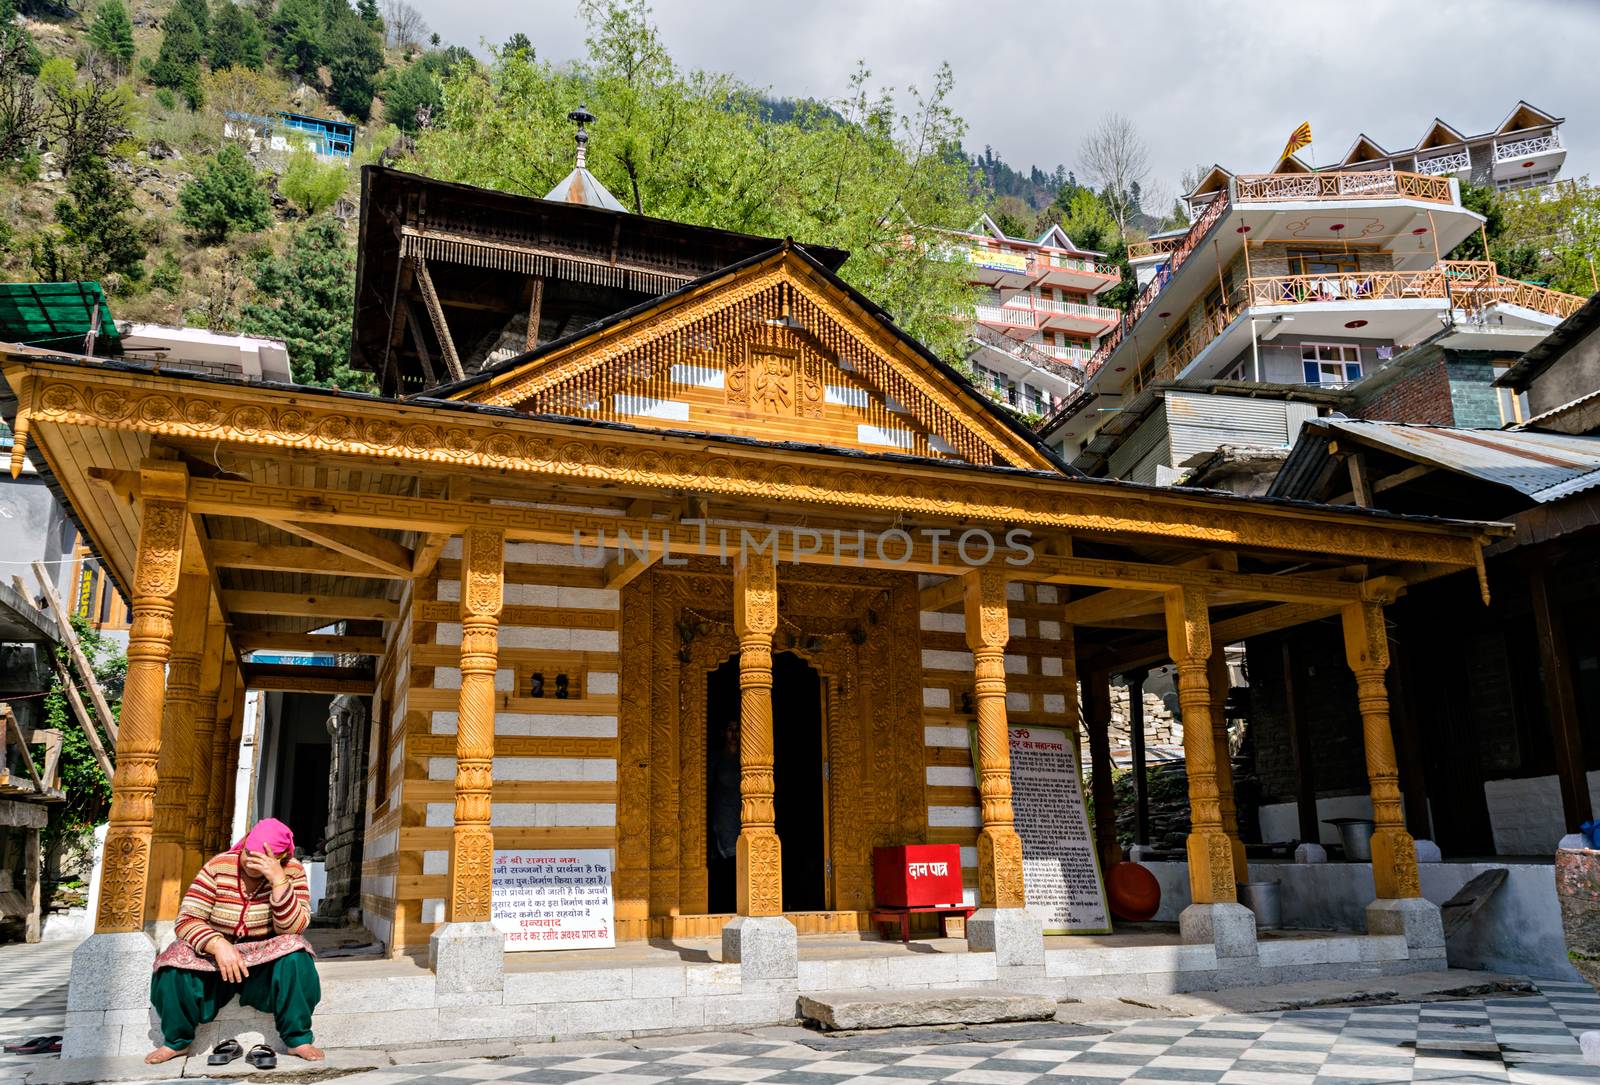 A lady sitting in Sunlight in front of Vashistha temple famous for hot water springs in Manali, Himachal Pradesh, India. by lalam